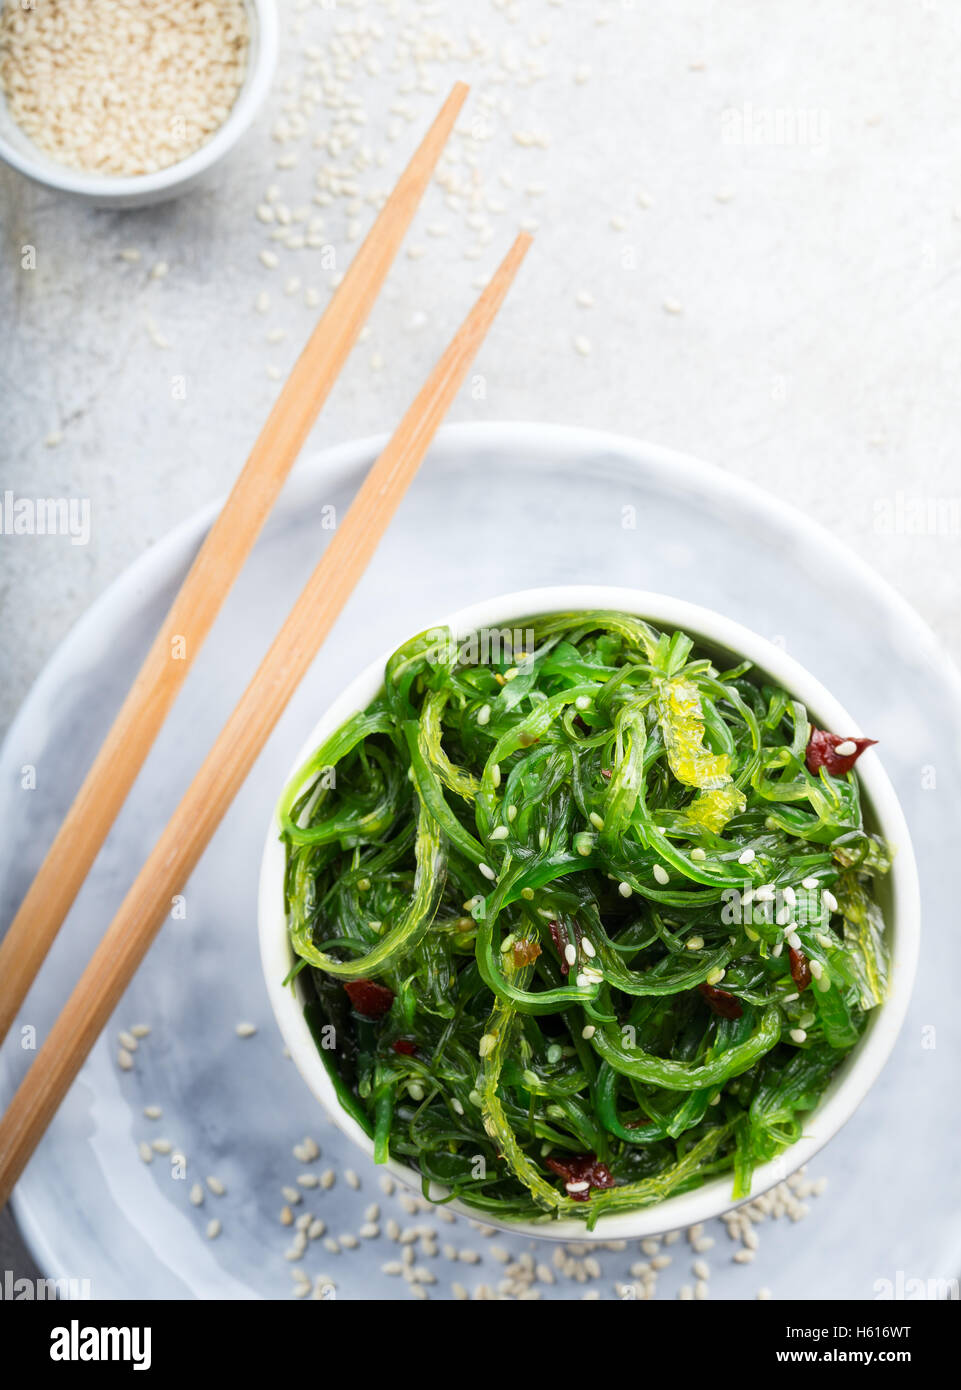 Healthy nutritious salad with seaweed Stock Photo